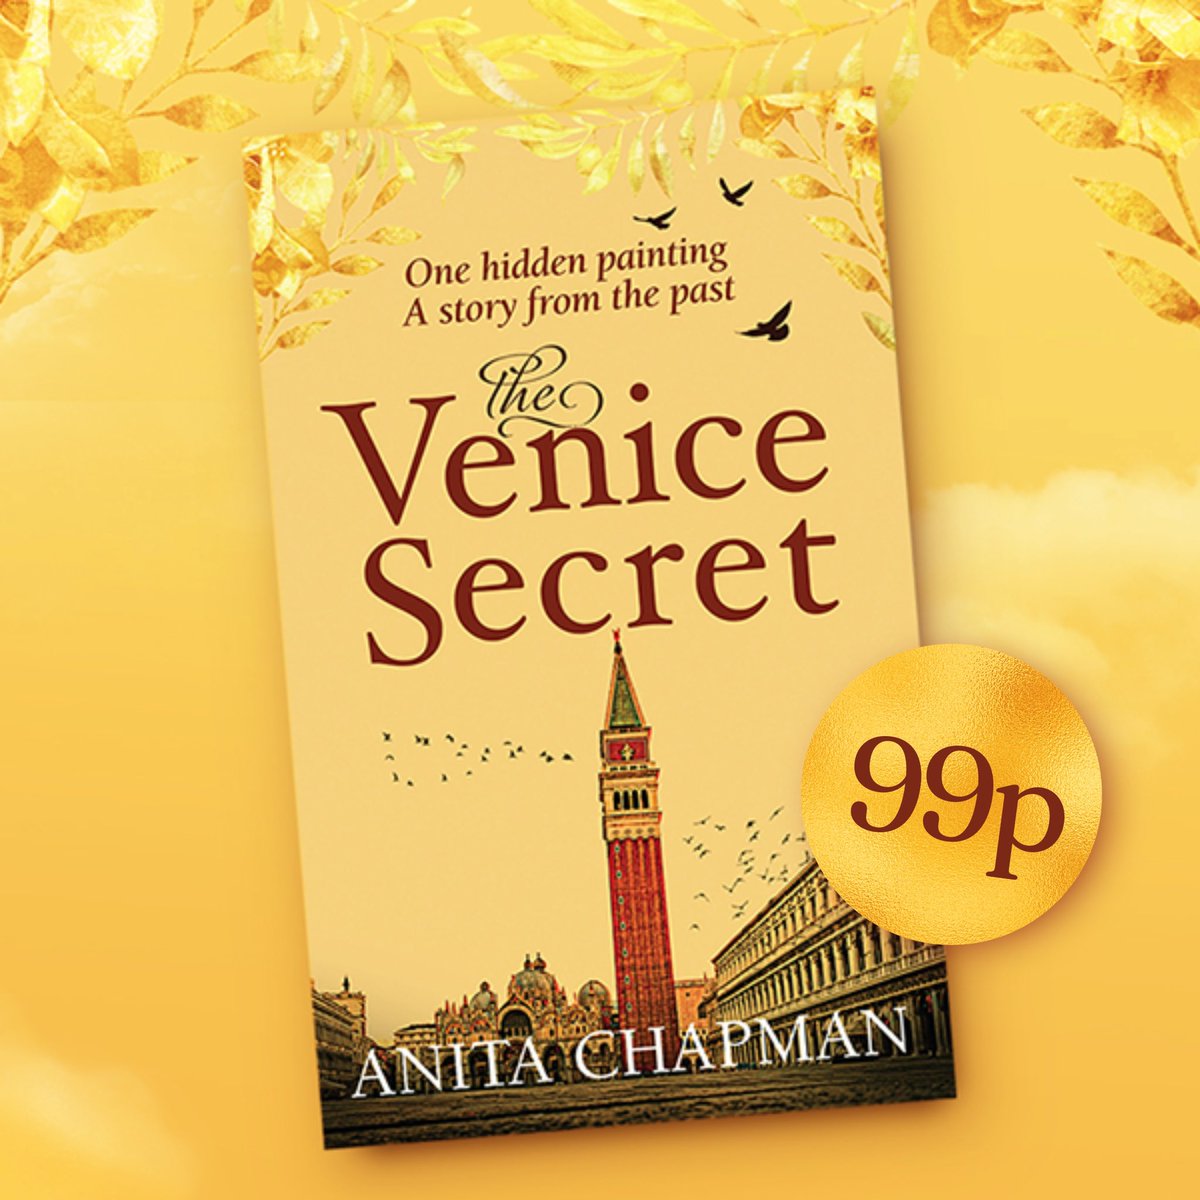 L👀king for something to read this weekend? ✨The Venice Secret is out now as ebook - currently 99p, Prime Reading, Kindle Unlimited, pb 'As someone who loves programmes like Fake or Fortune, this book was right up my street!' Christina Courtenay amzn.to/3ES3oGy